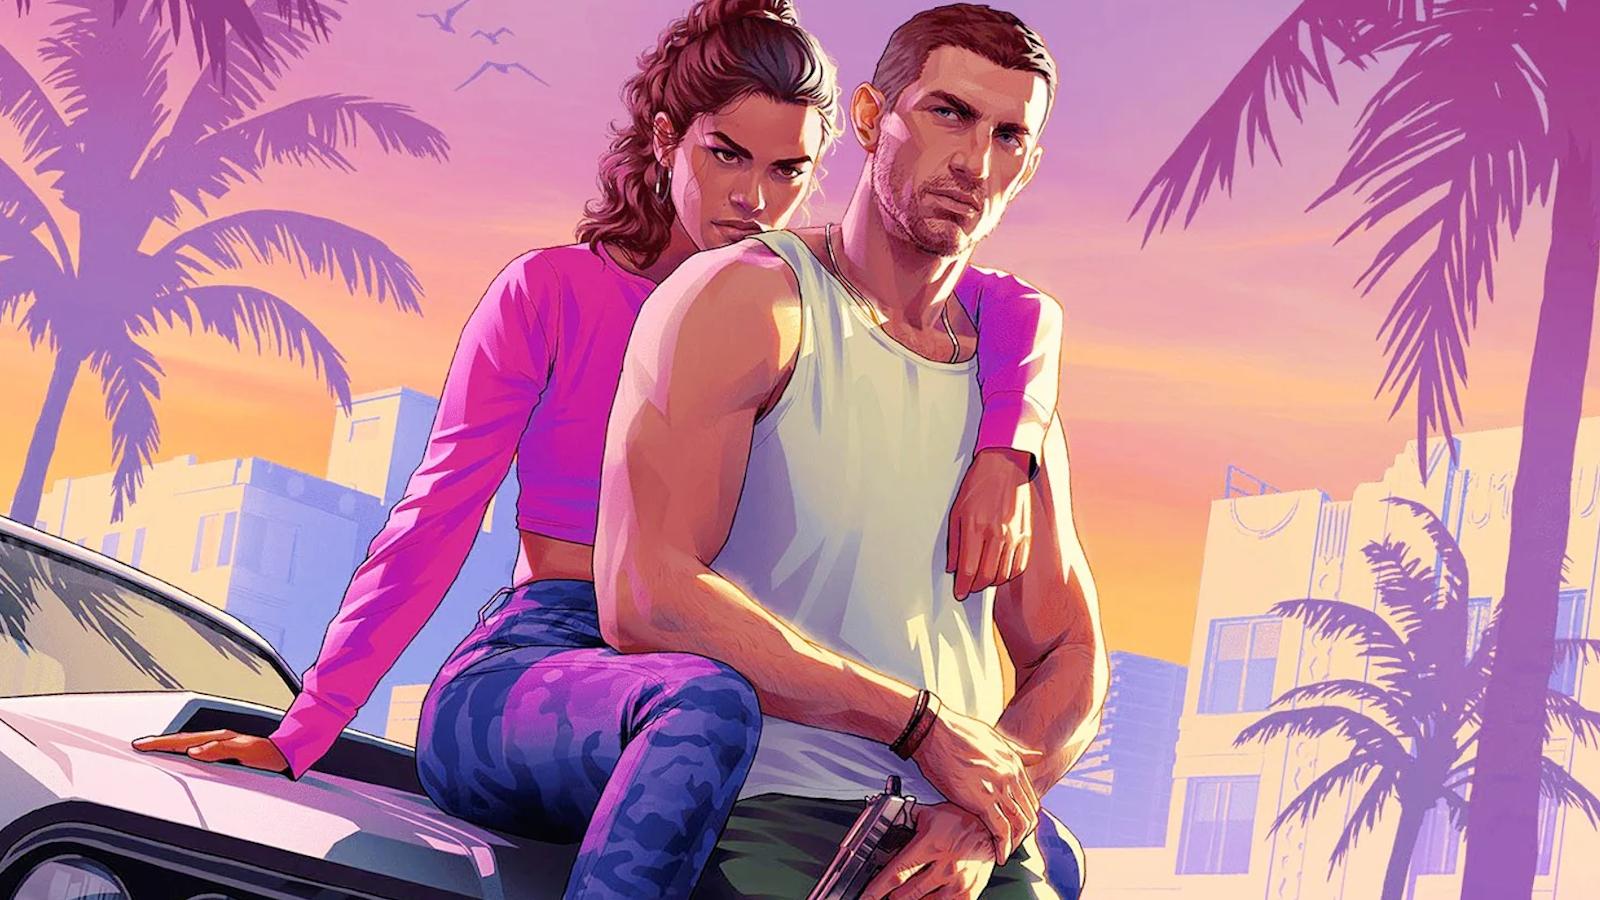 jason and lucia cover art for GTA 6